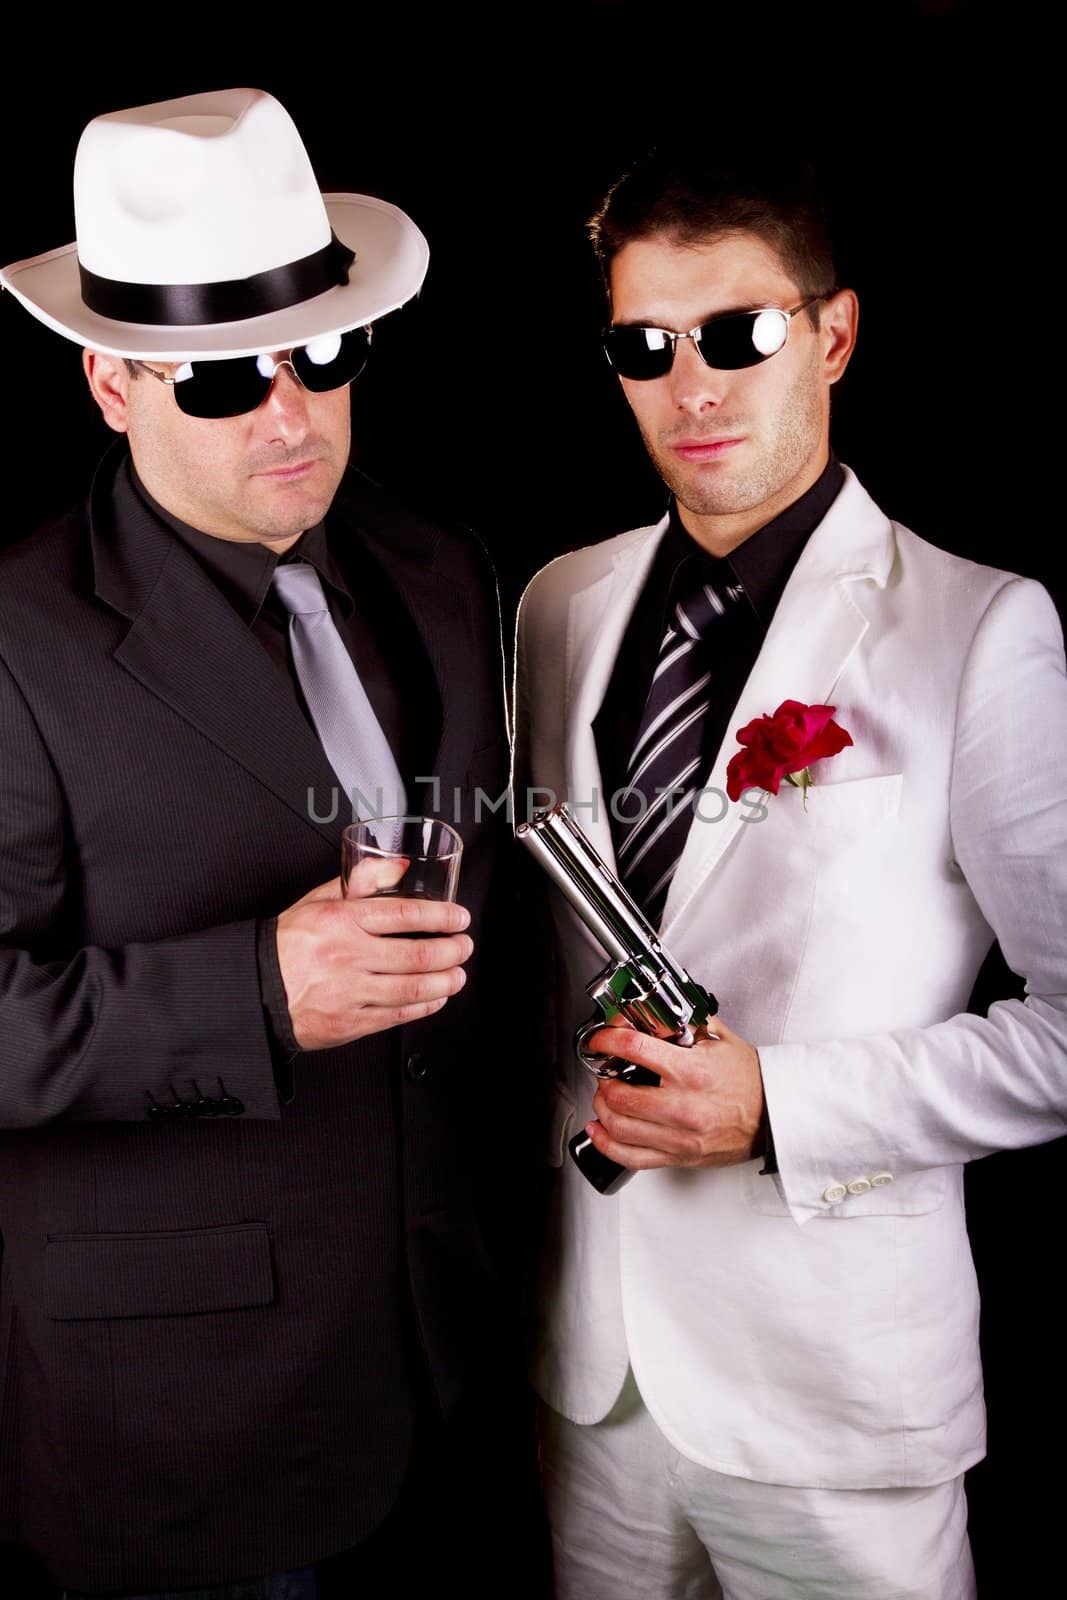 View of two gangster males holding a gun on a black background.